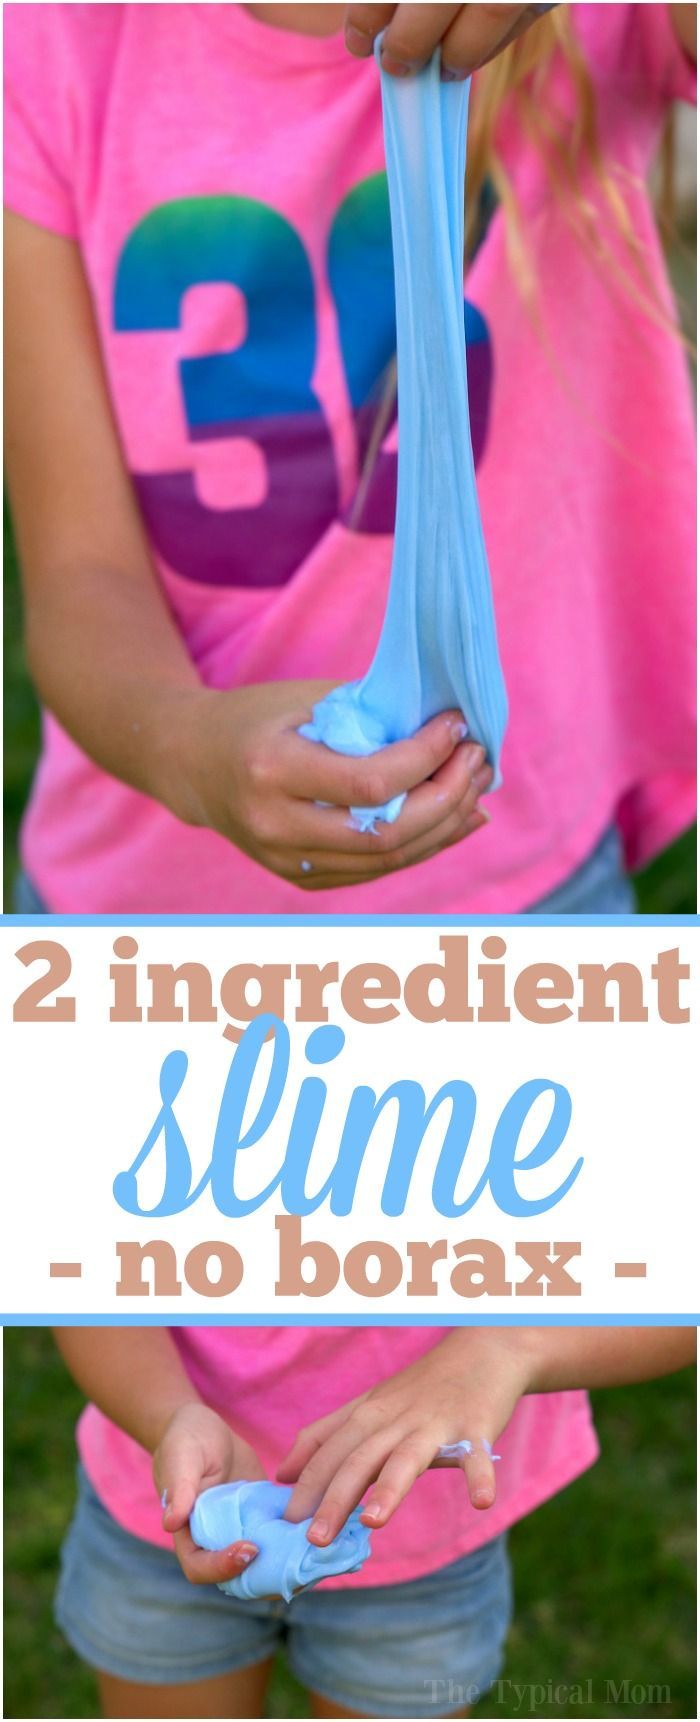 How to Make 2 Ingredient Laundry Detergent Slime - How to Make 2 Ingredient Laundry Detergent Slime -   19 diy Slime without borax ideas